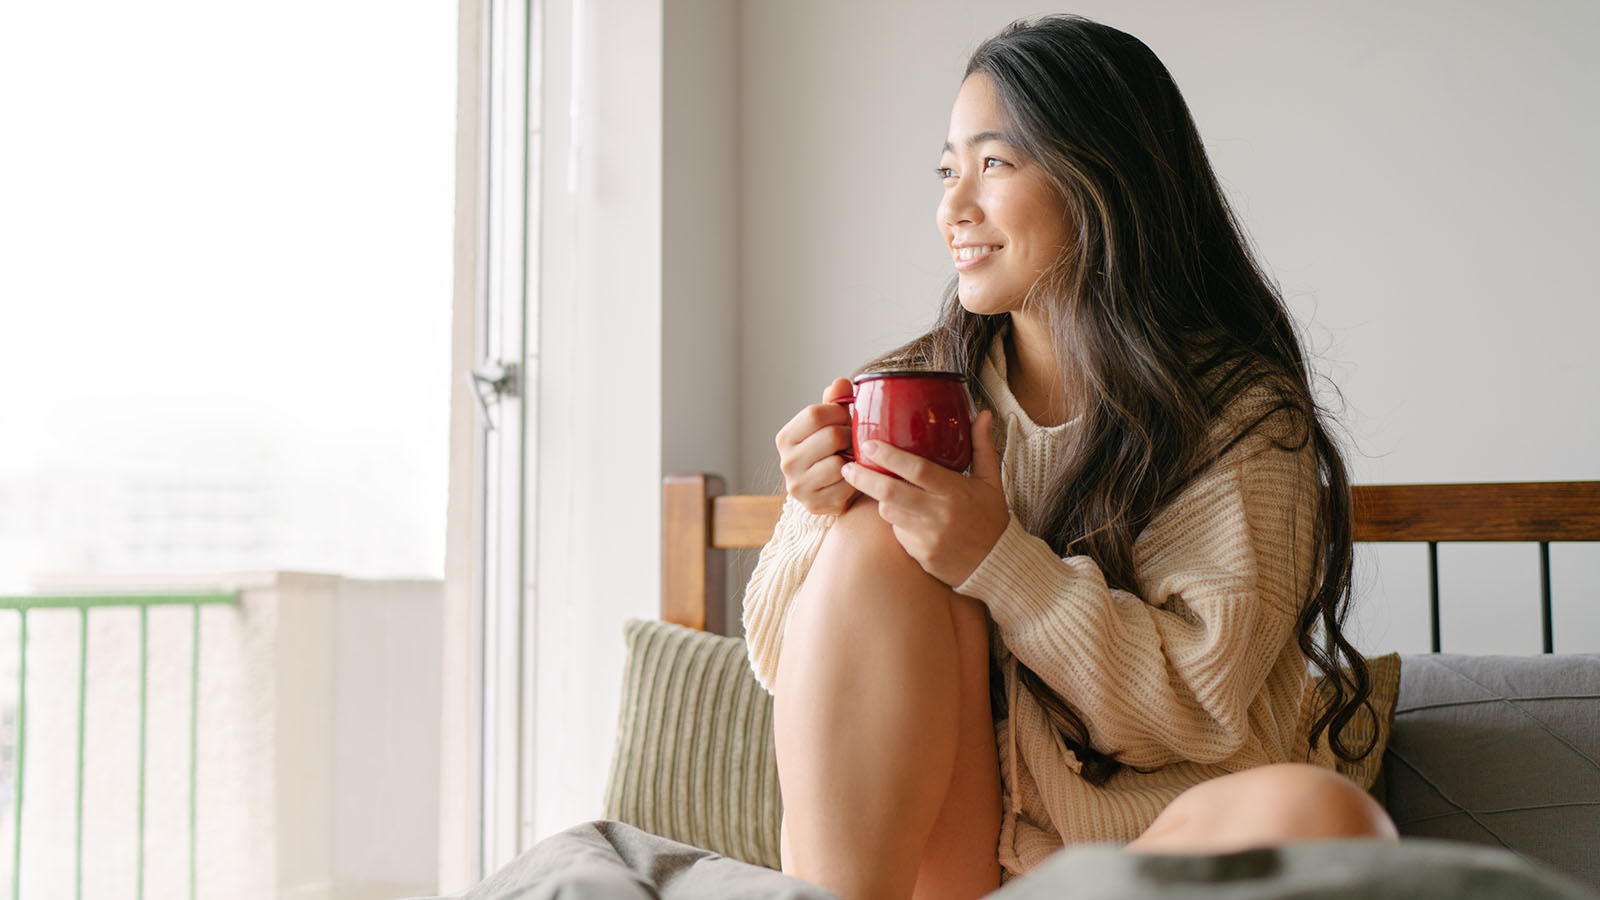 Young woman enjoying a cup of coffee and looking out the window in the morning